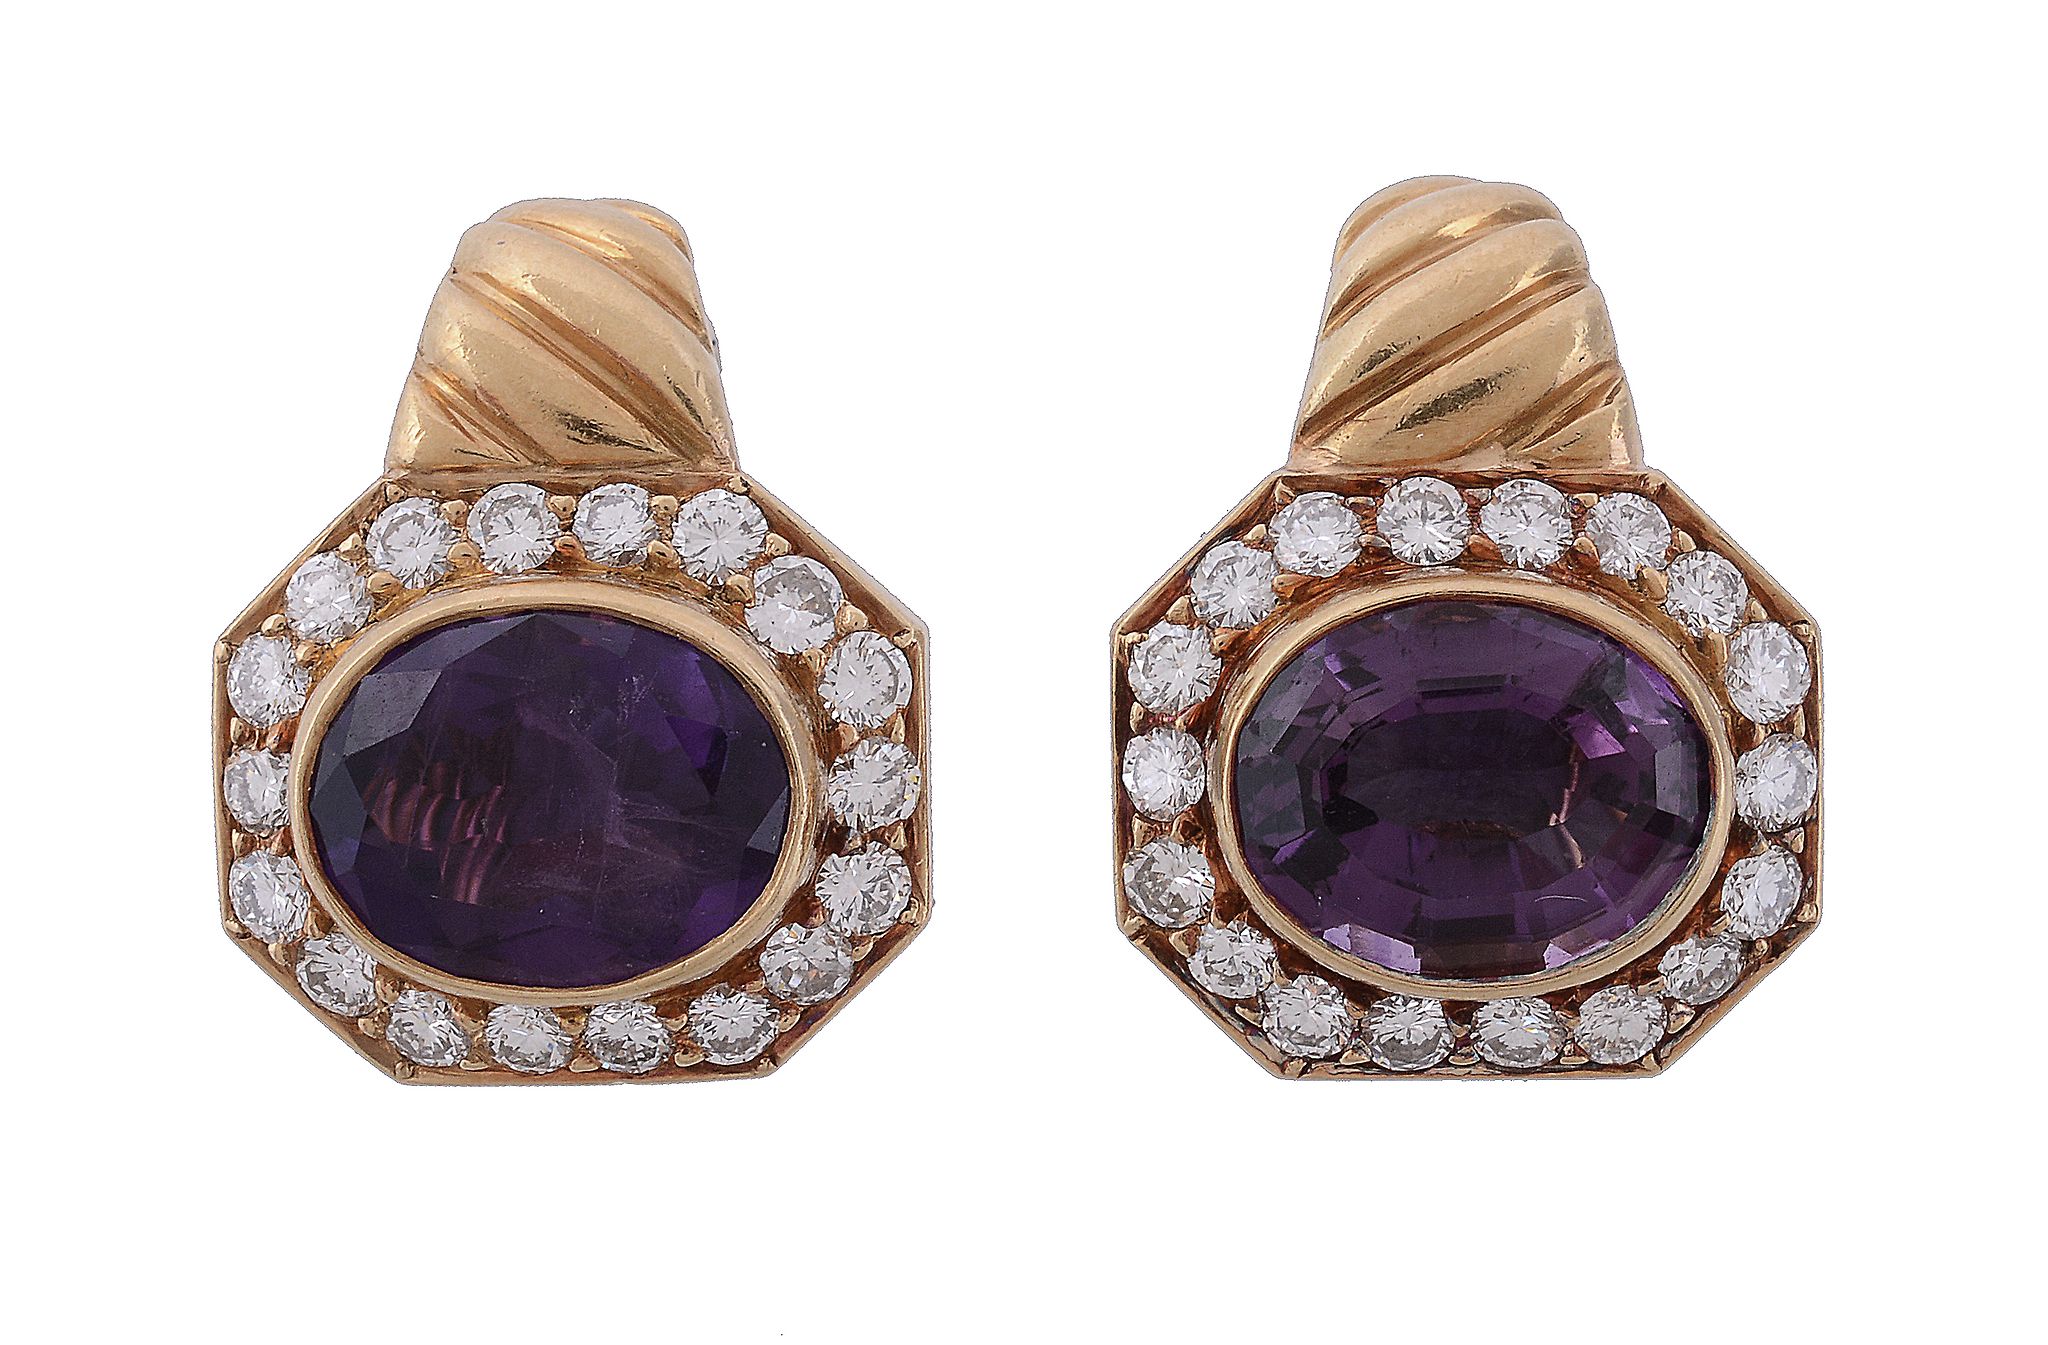 A pair of amethyst and diamond earrings by Bulgari A pair of amethyst and diamond earrings by